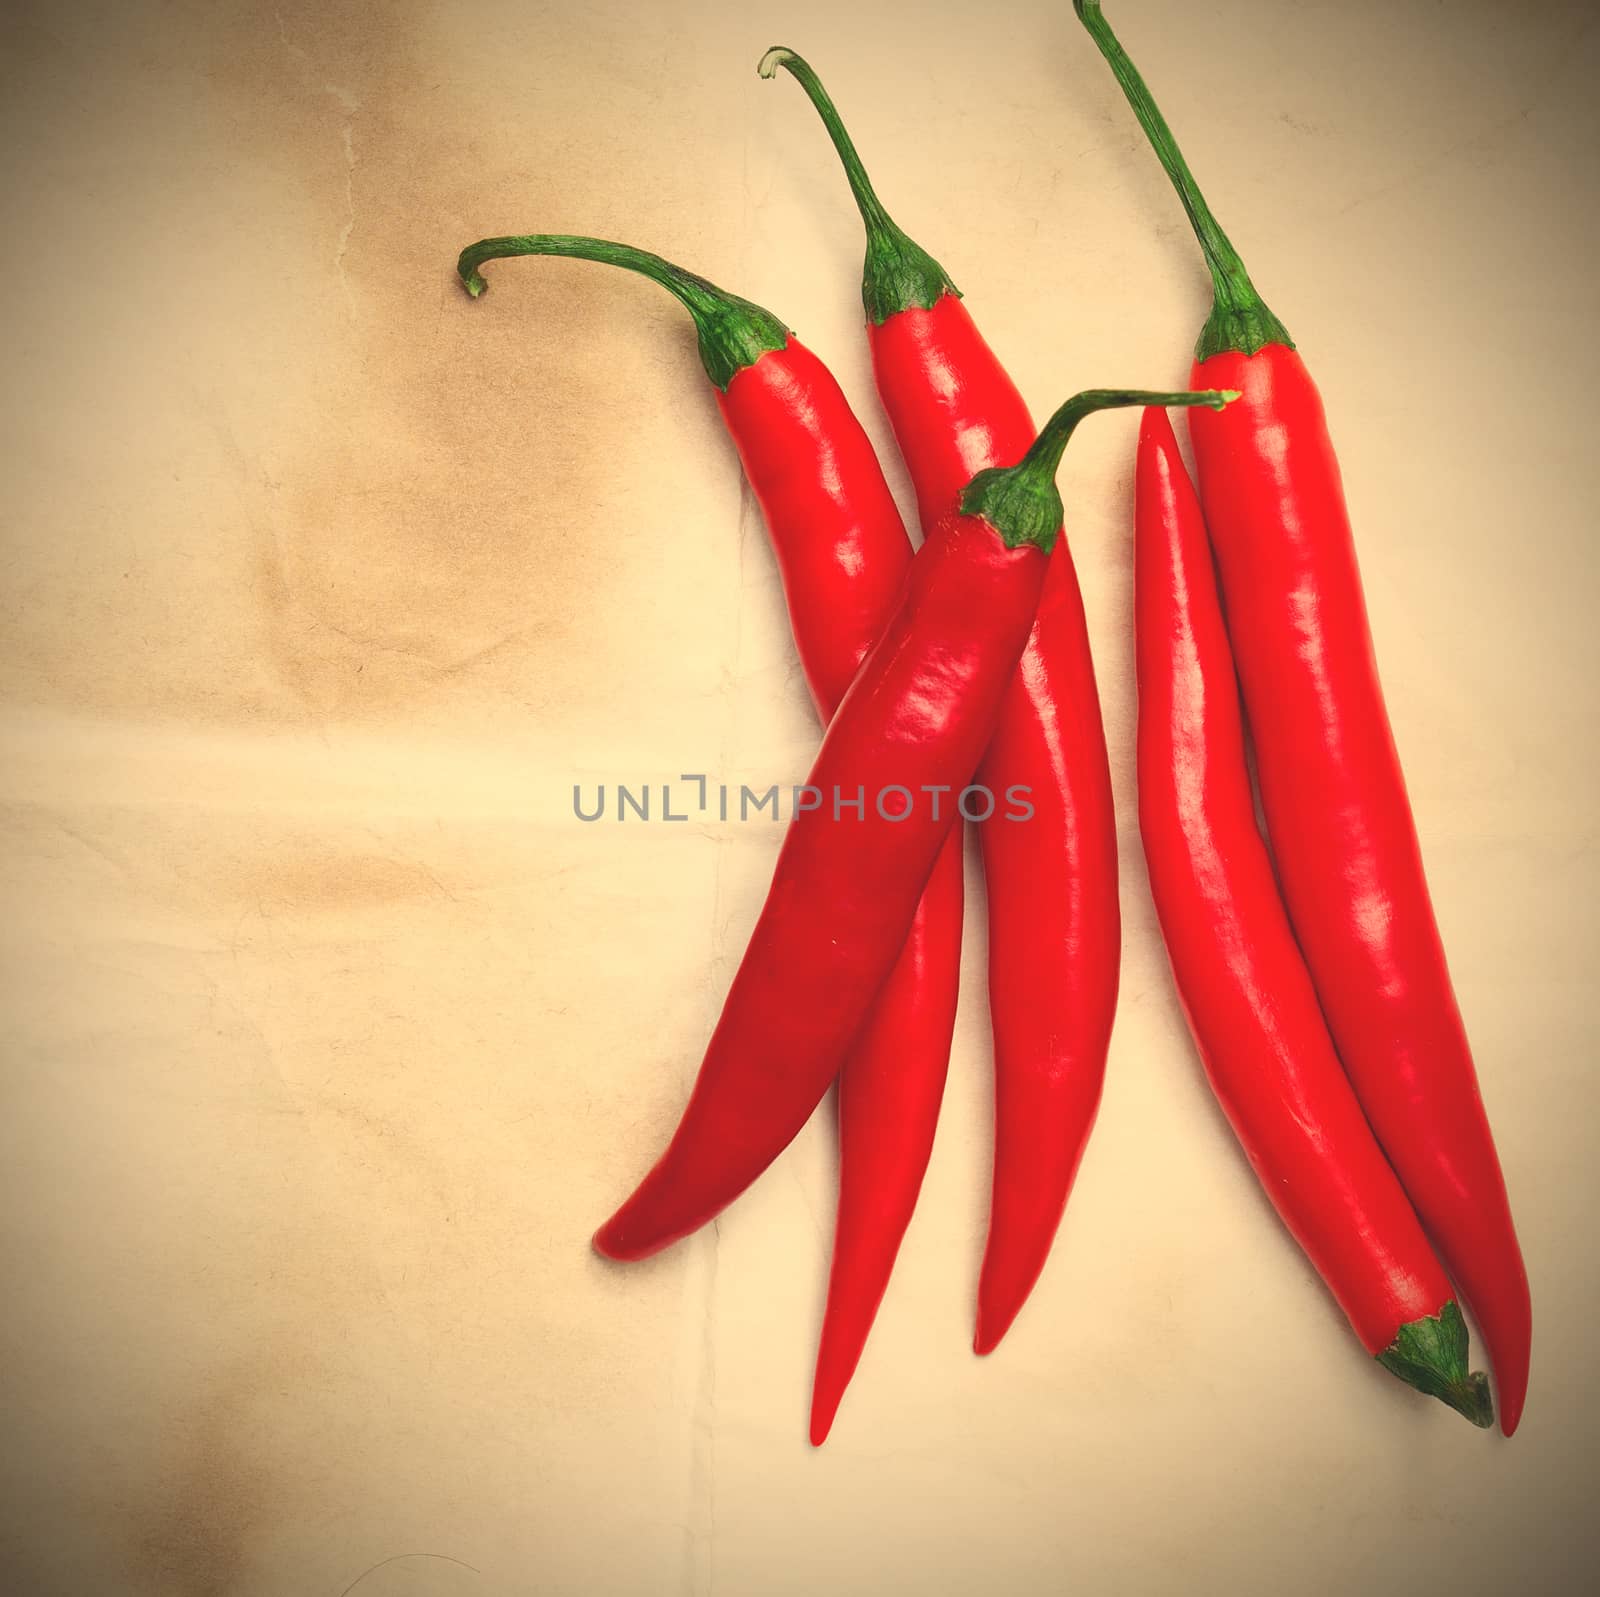 chili pepper on a vintage paper surface background, instagram image style